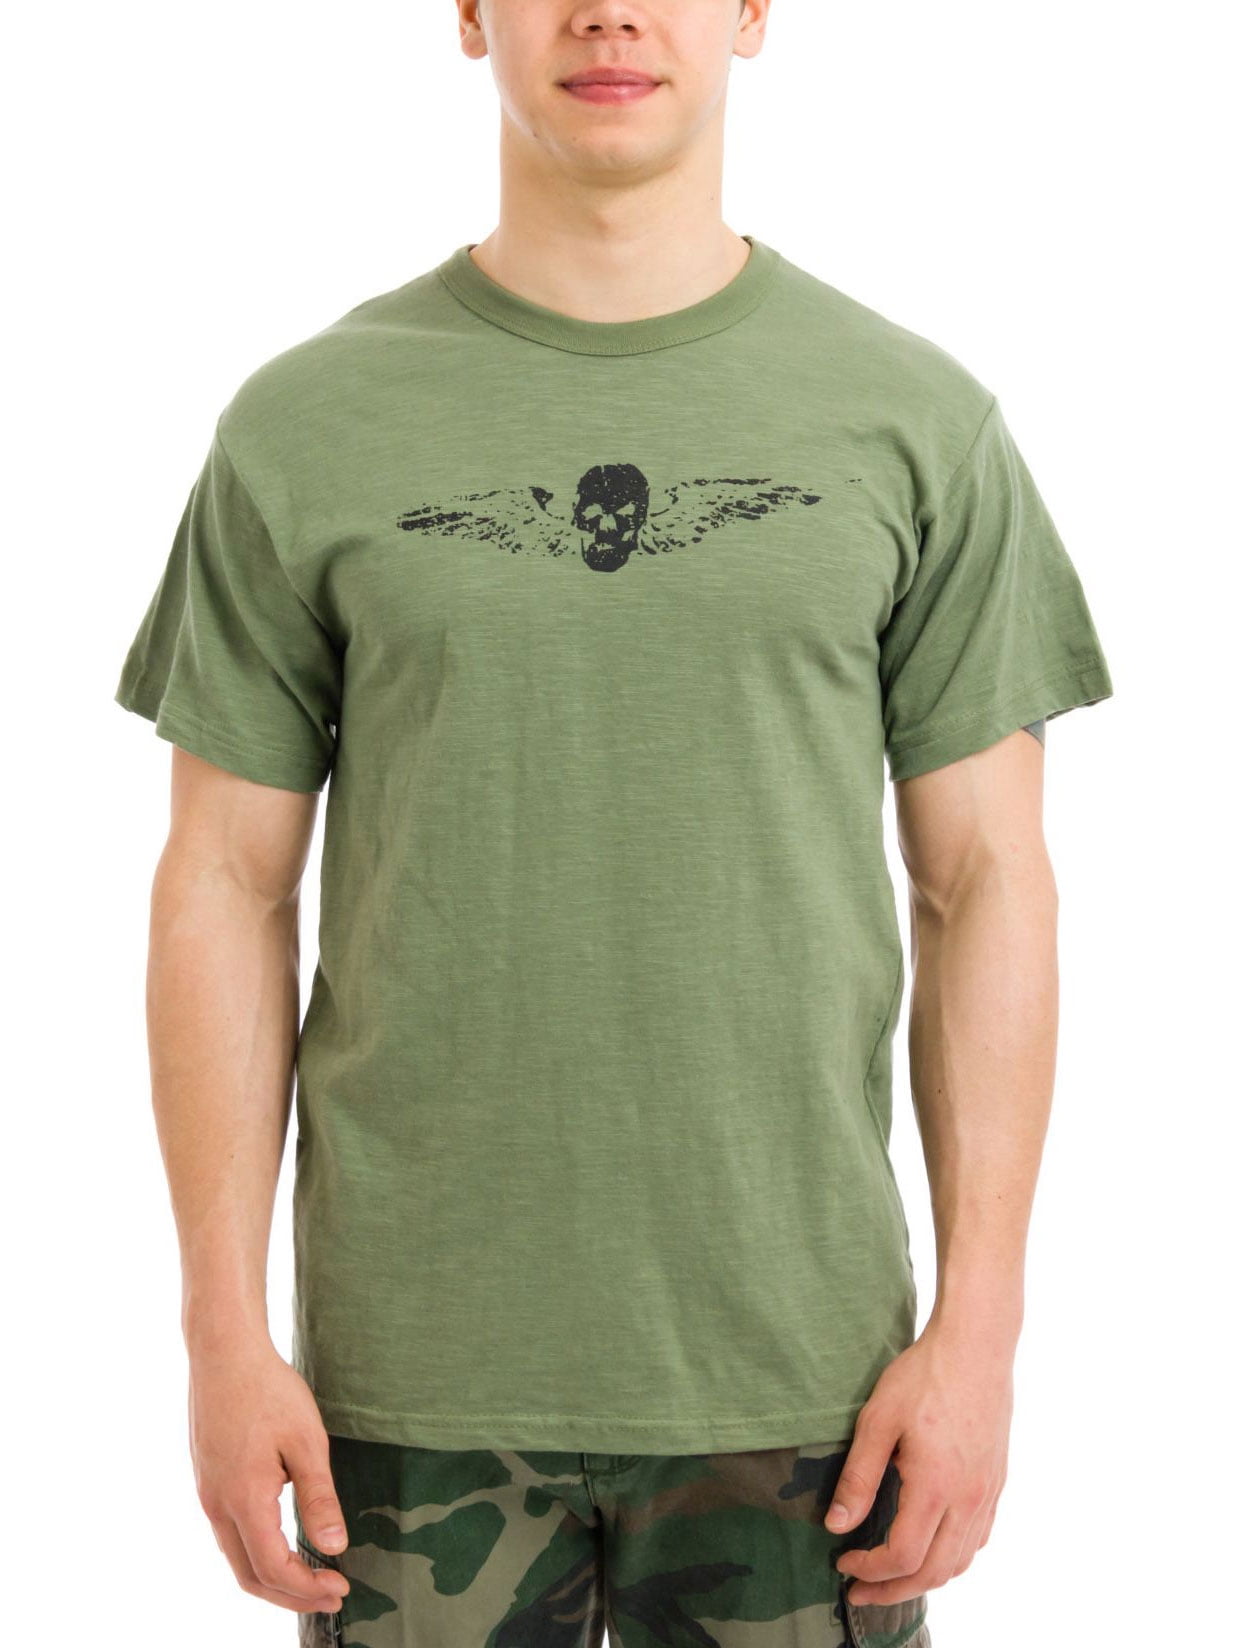 ScudoPro Army Skull Technical T-Shirt for Men and Women